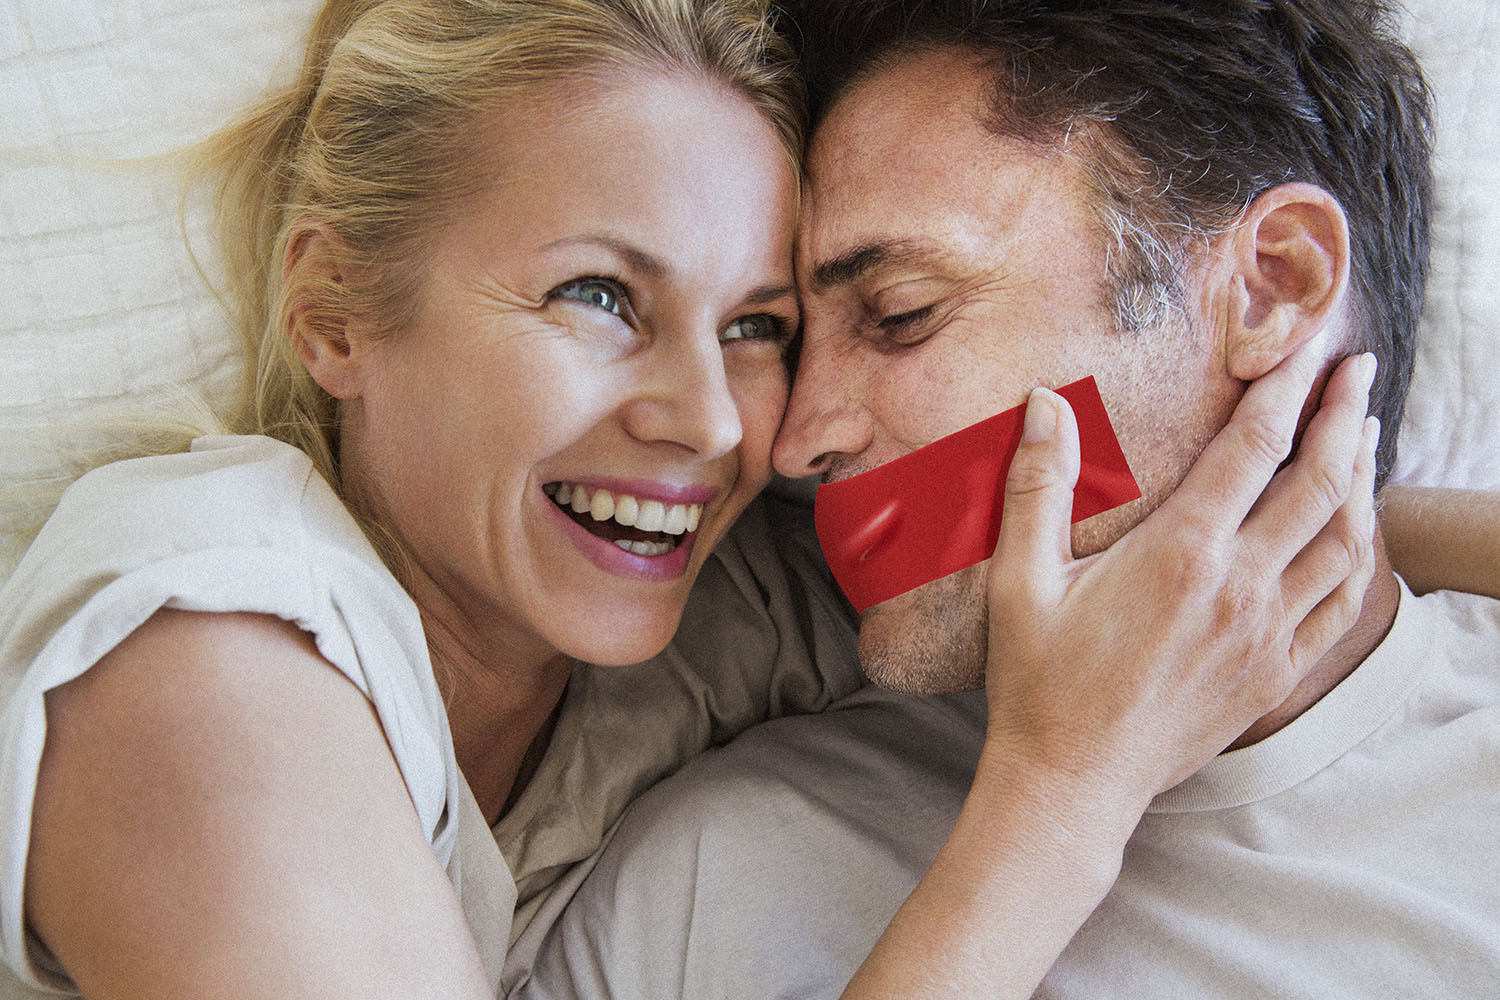 Couple in romantic embrace, woman laughing, man has tape over his mouth